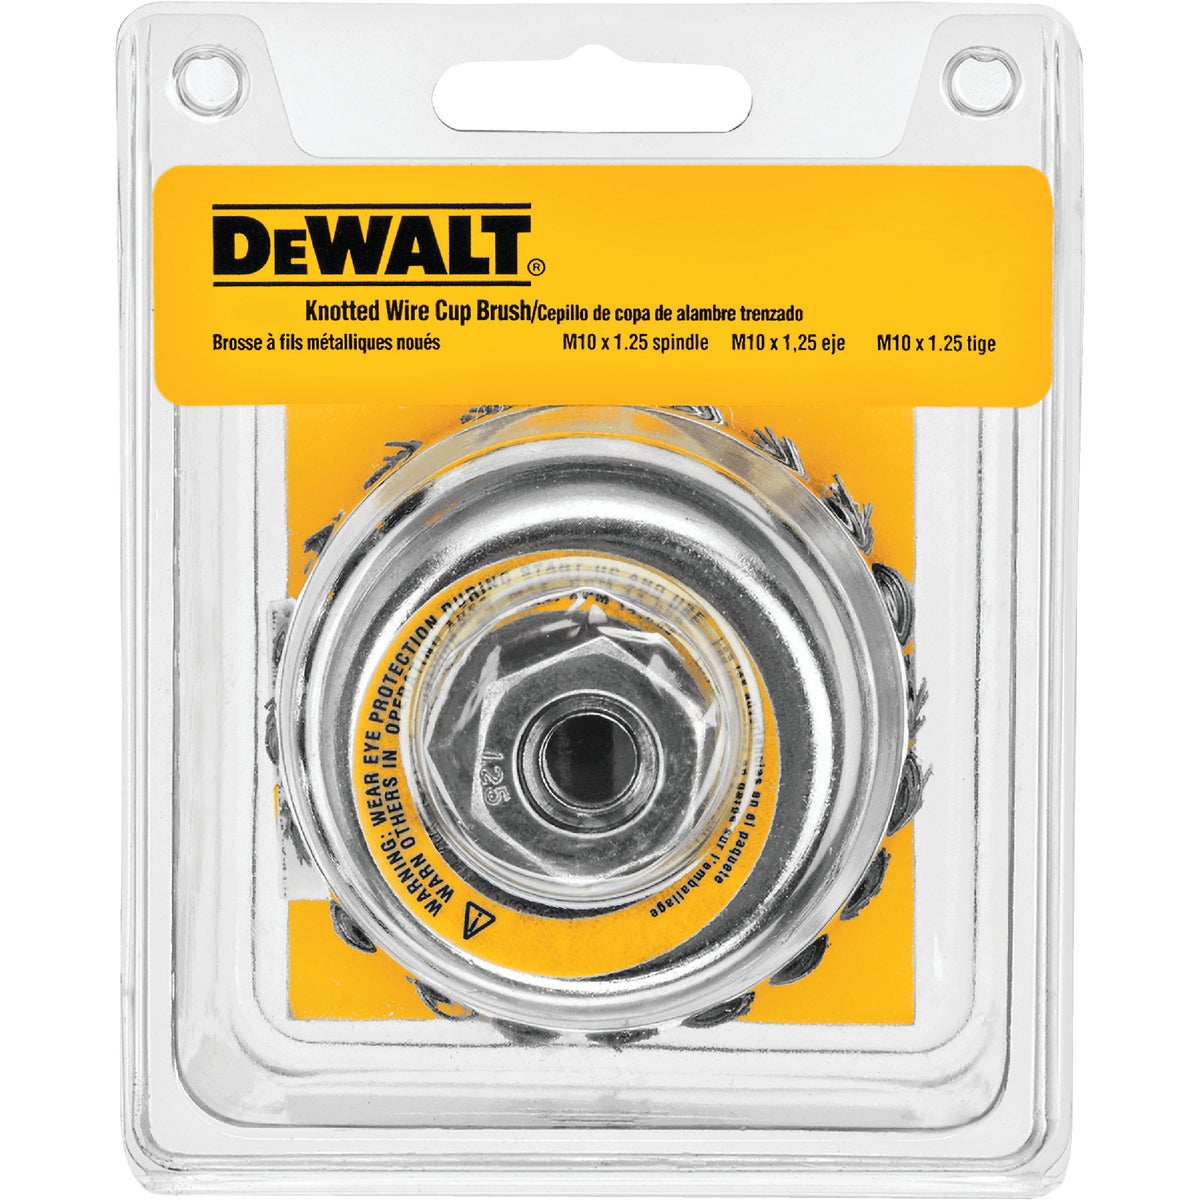 DEWALT 4 In. Knotted 0.020 In. Angle Grinder Wire Brush